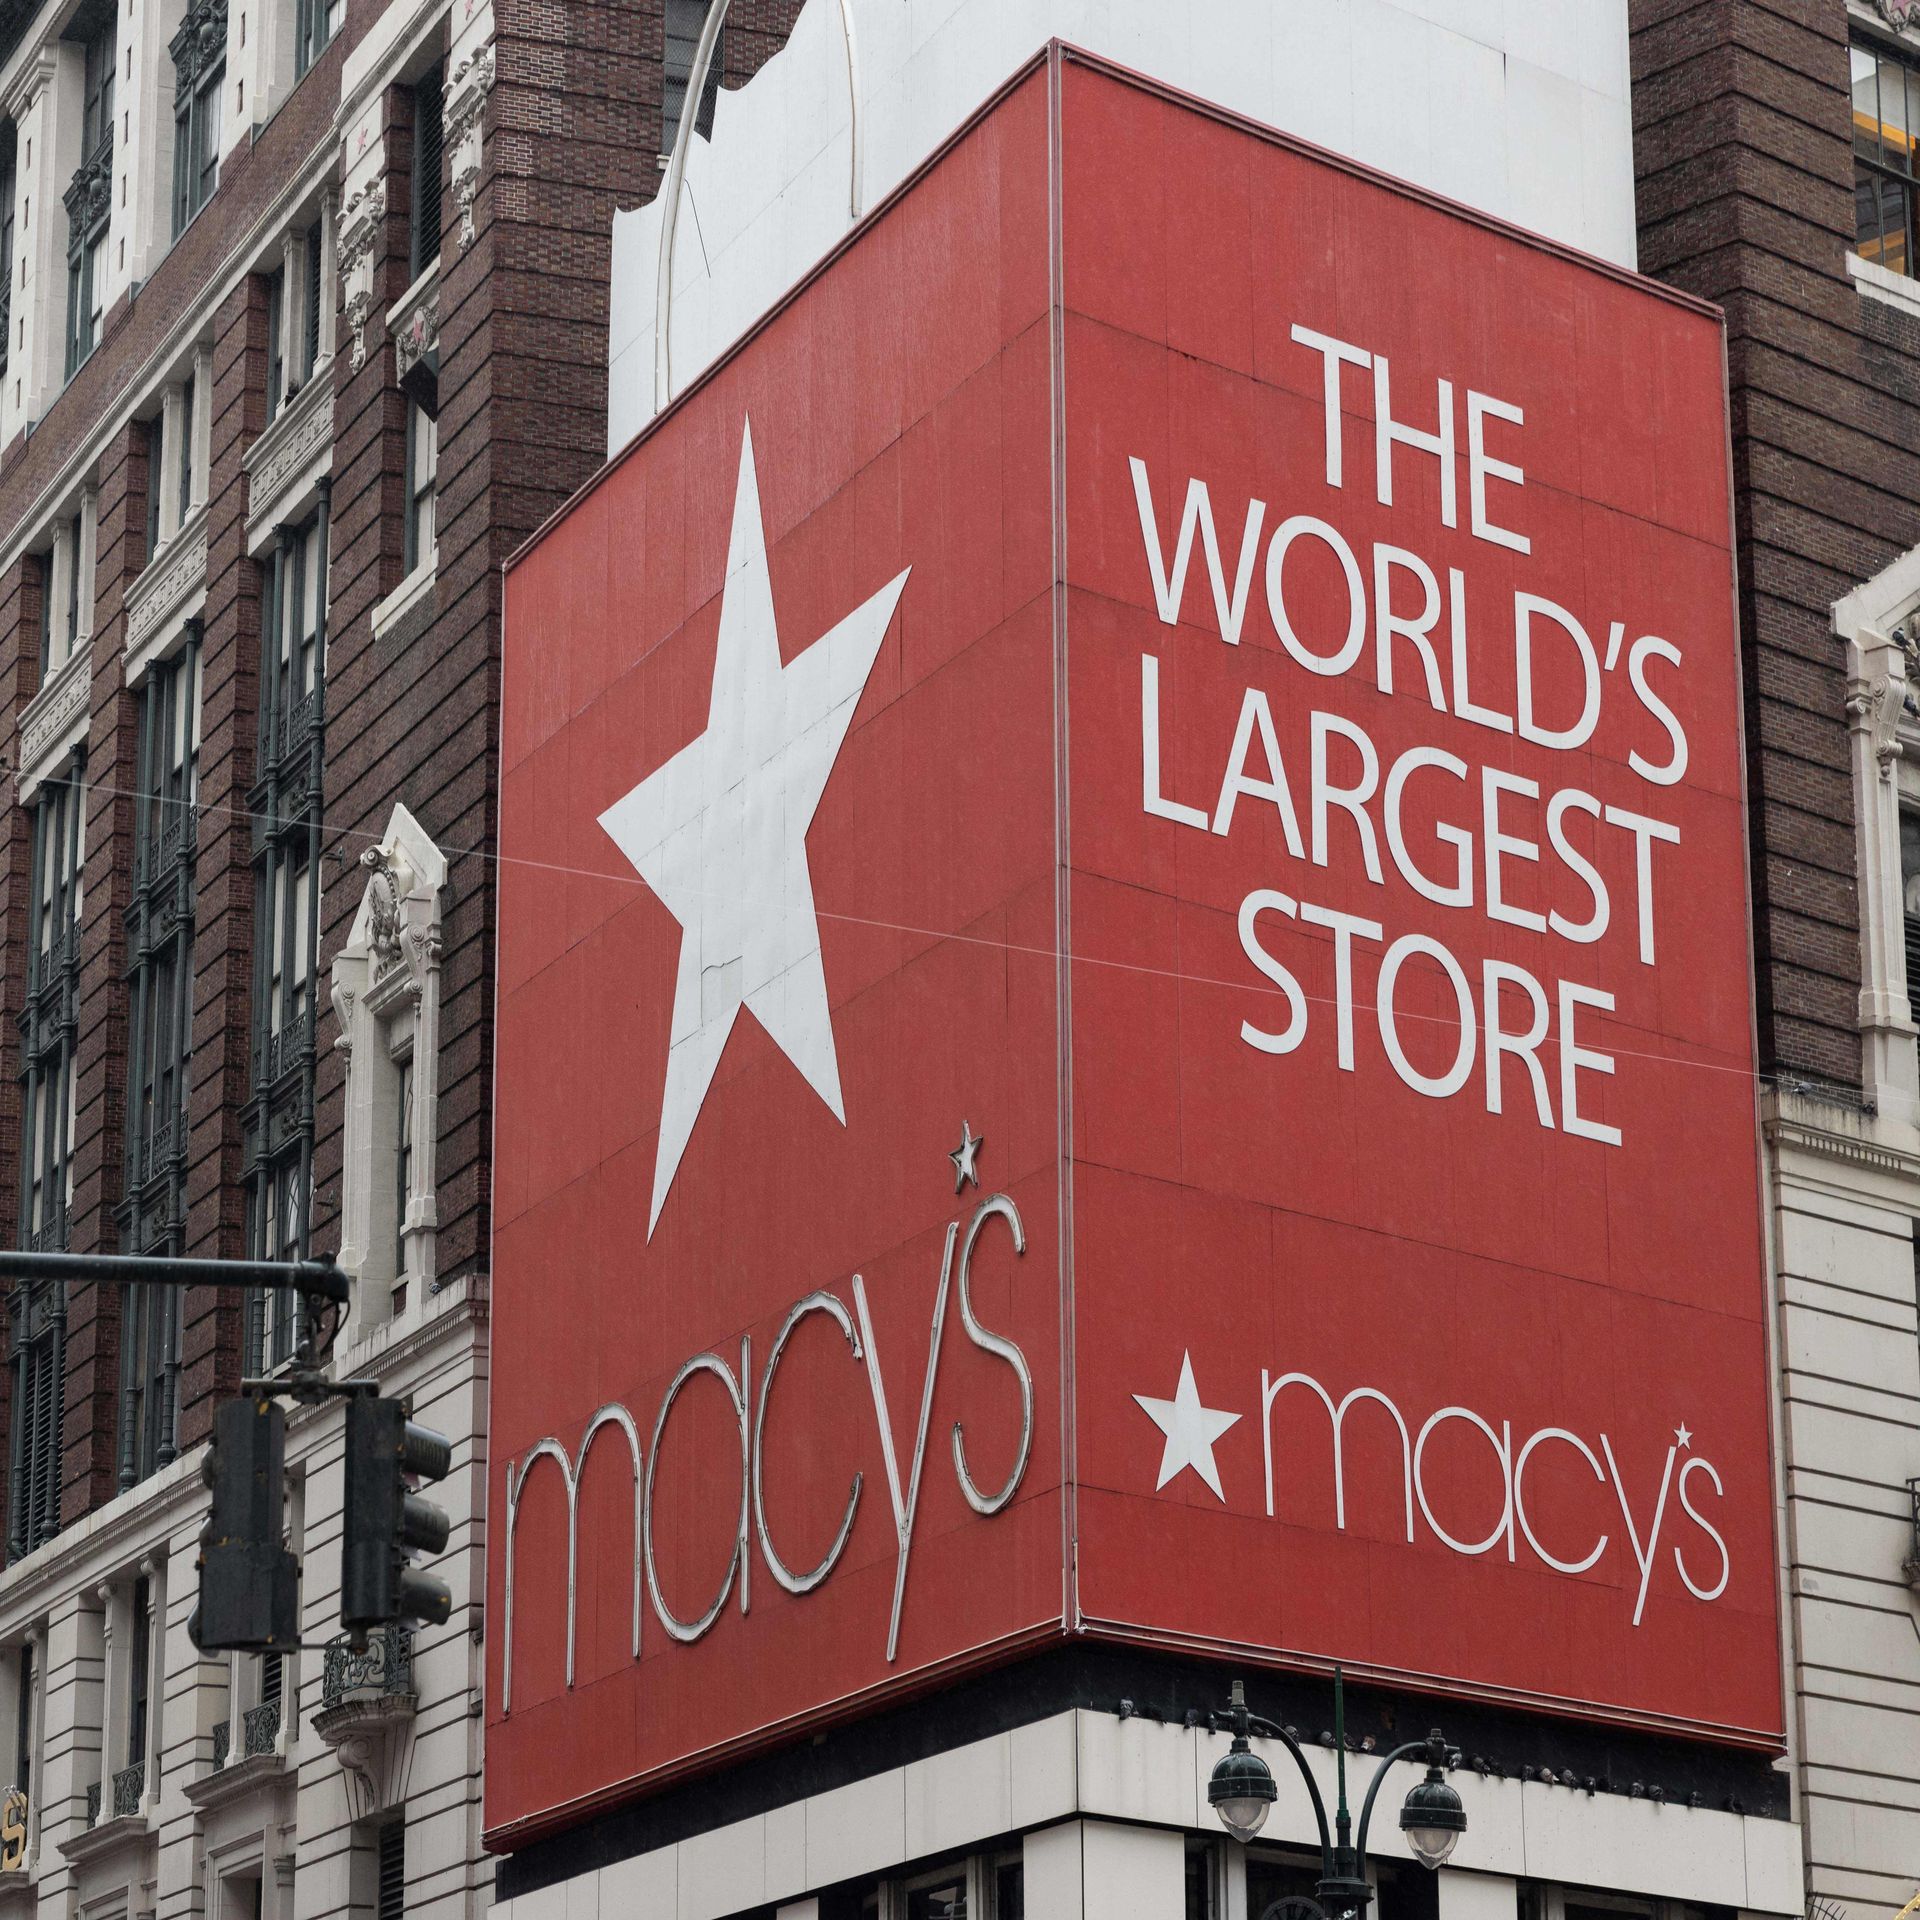 Macy's Just Launched its New Private Label, and Prices Start at